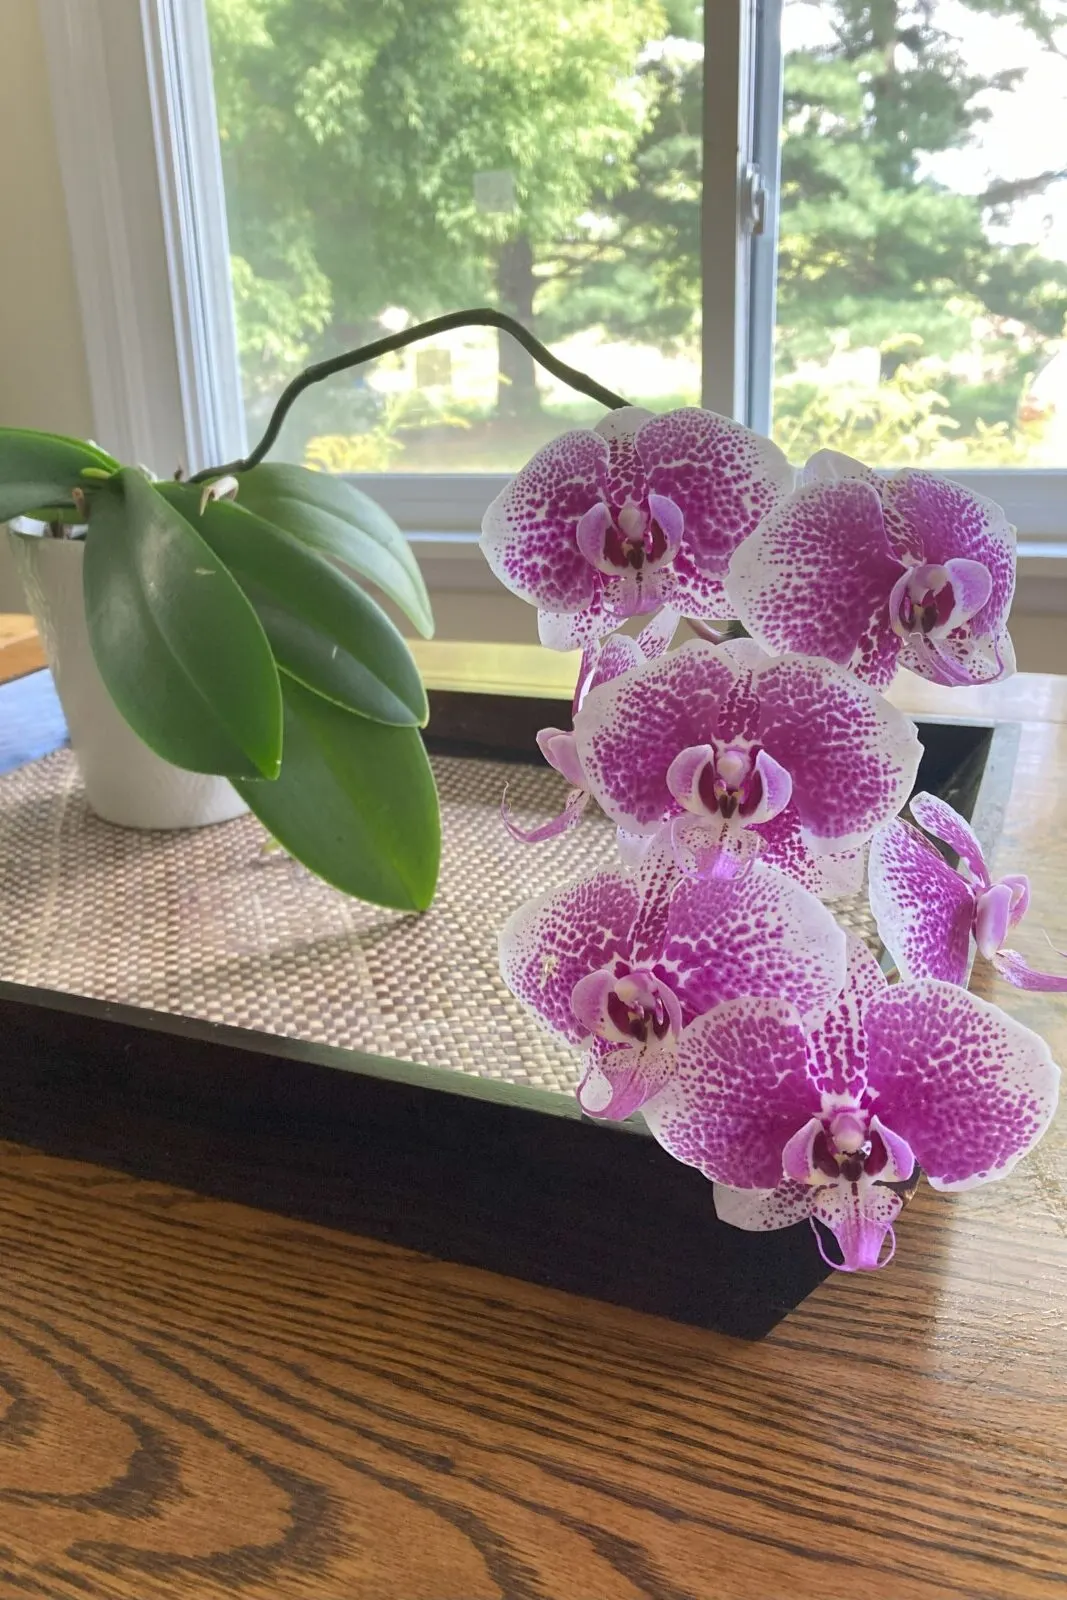 Phalaenopsis orchid in bloom on a tray.